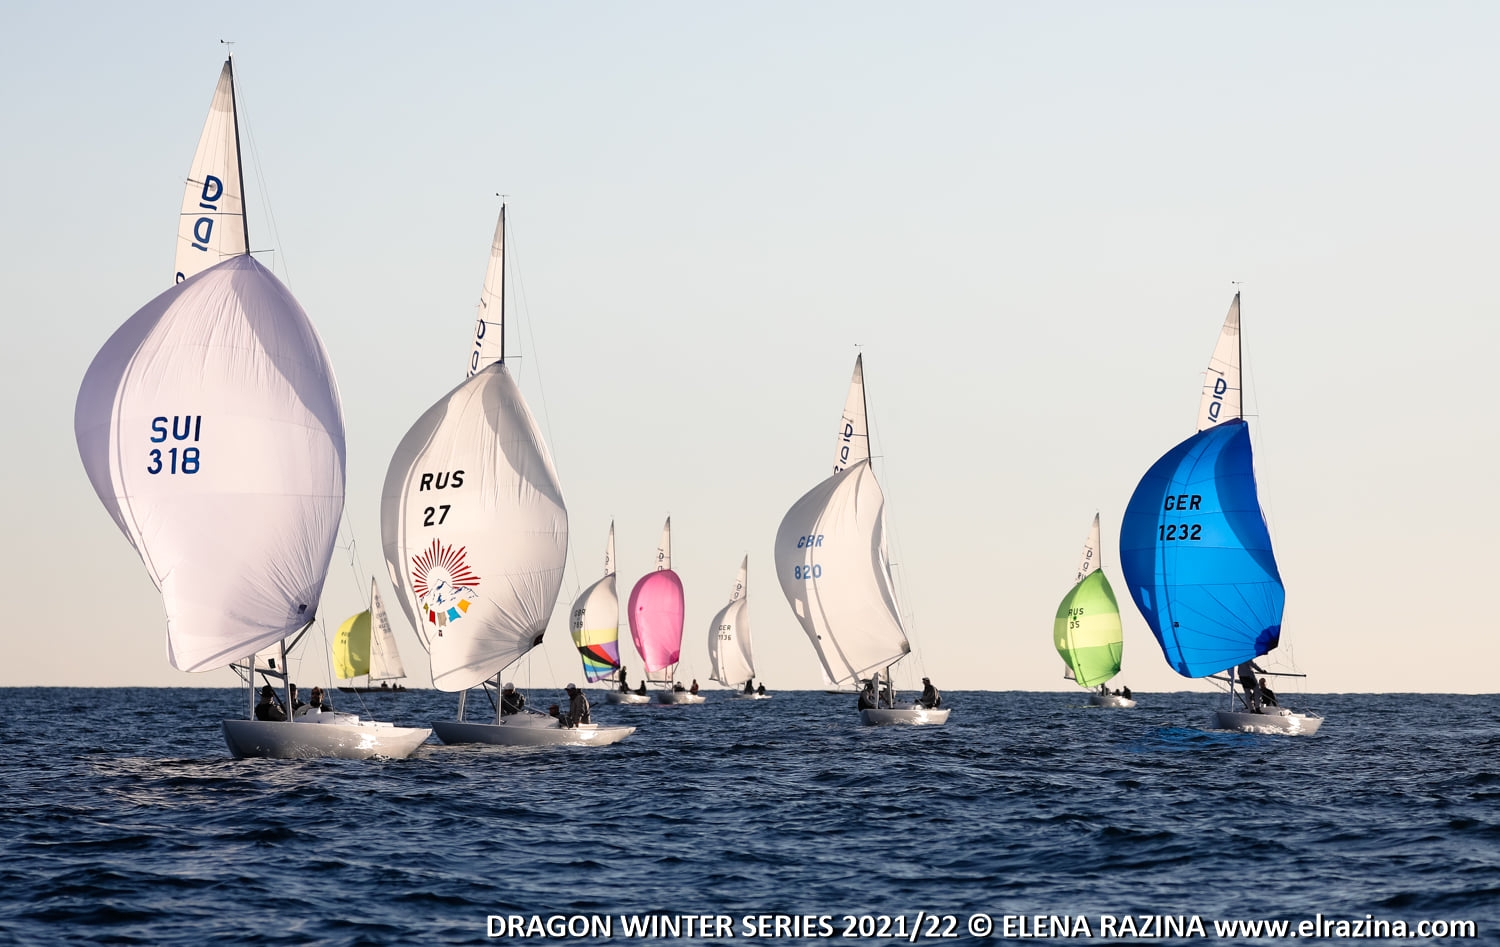  Dragon  Winter Series  Act 3  San Remo ITA  Final results  the Swiss